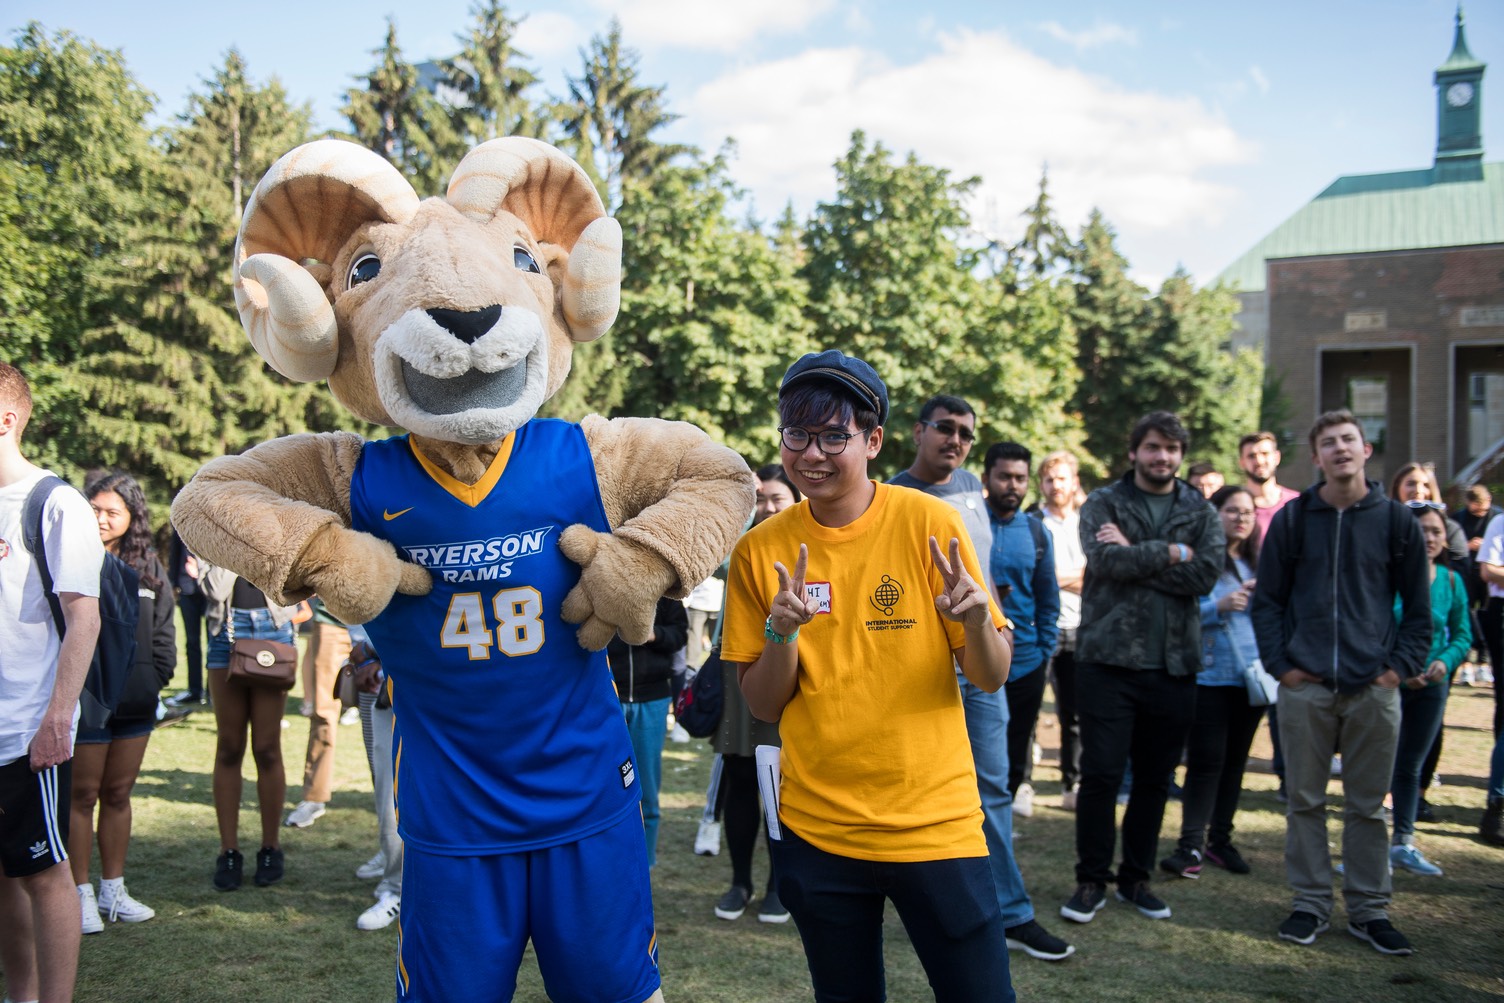 Student leader from International Student Support with mascot at orientations.